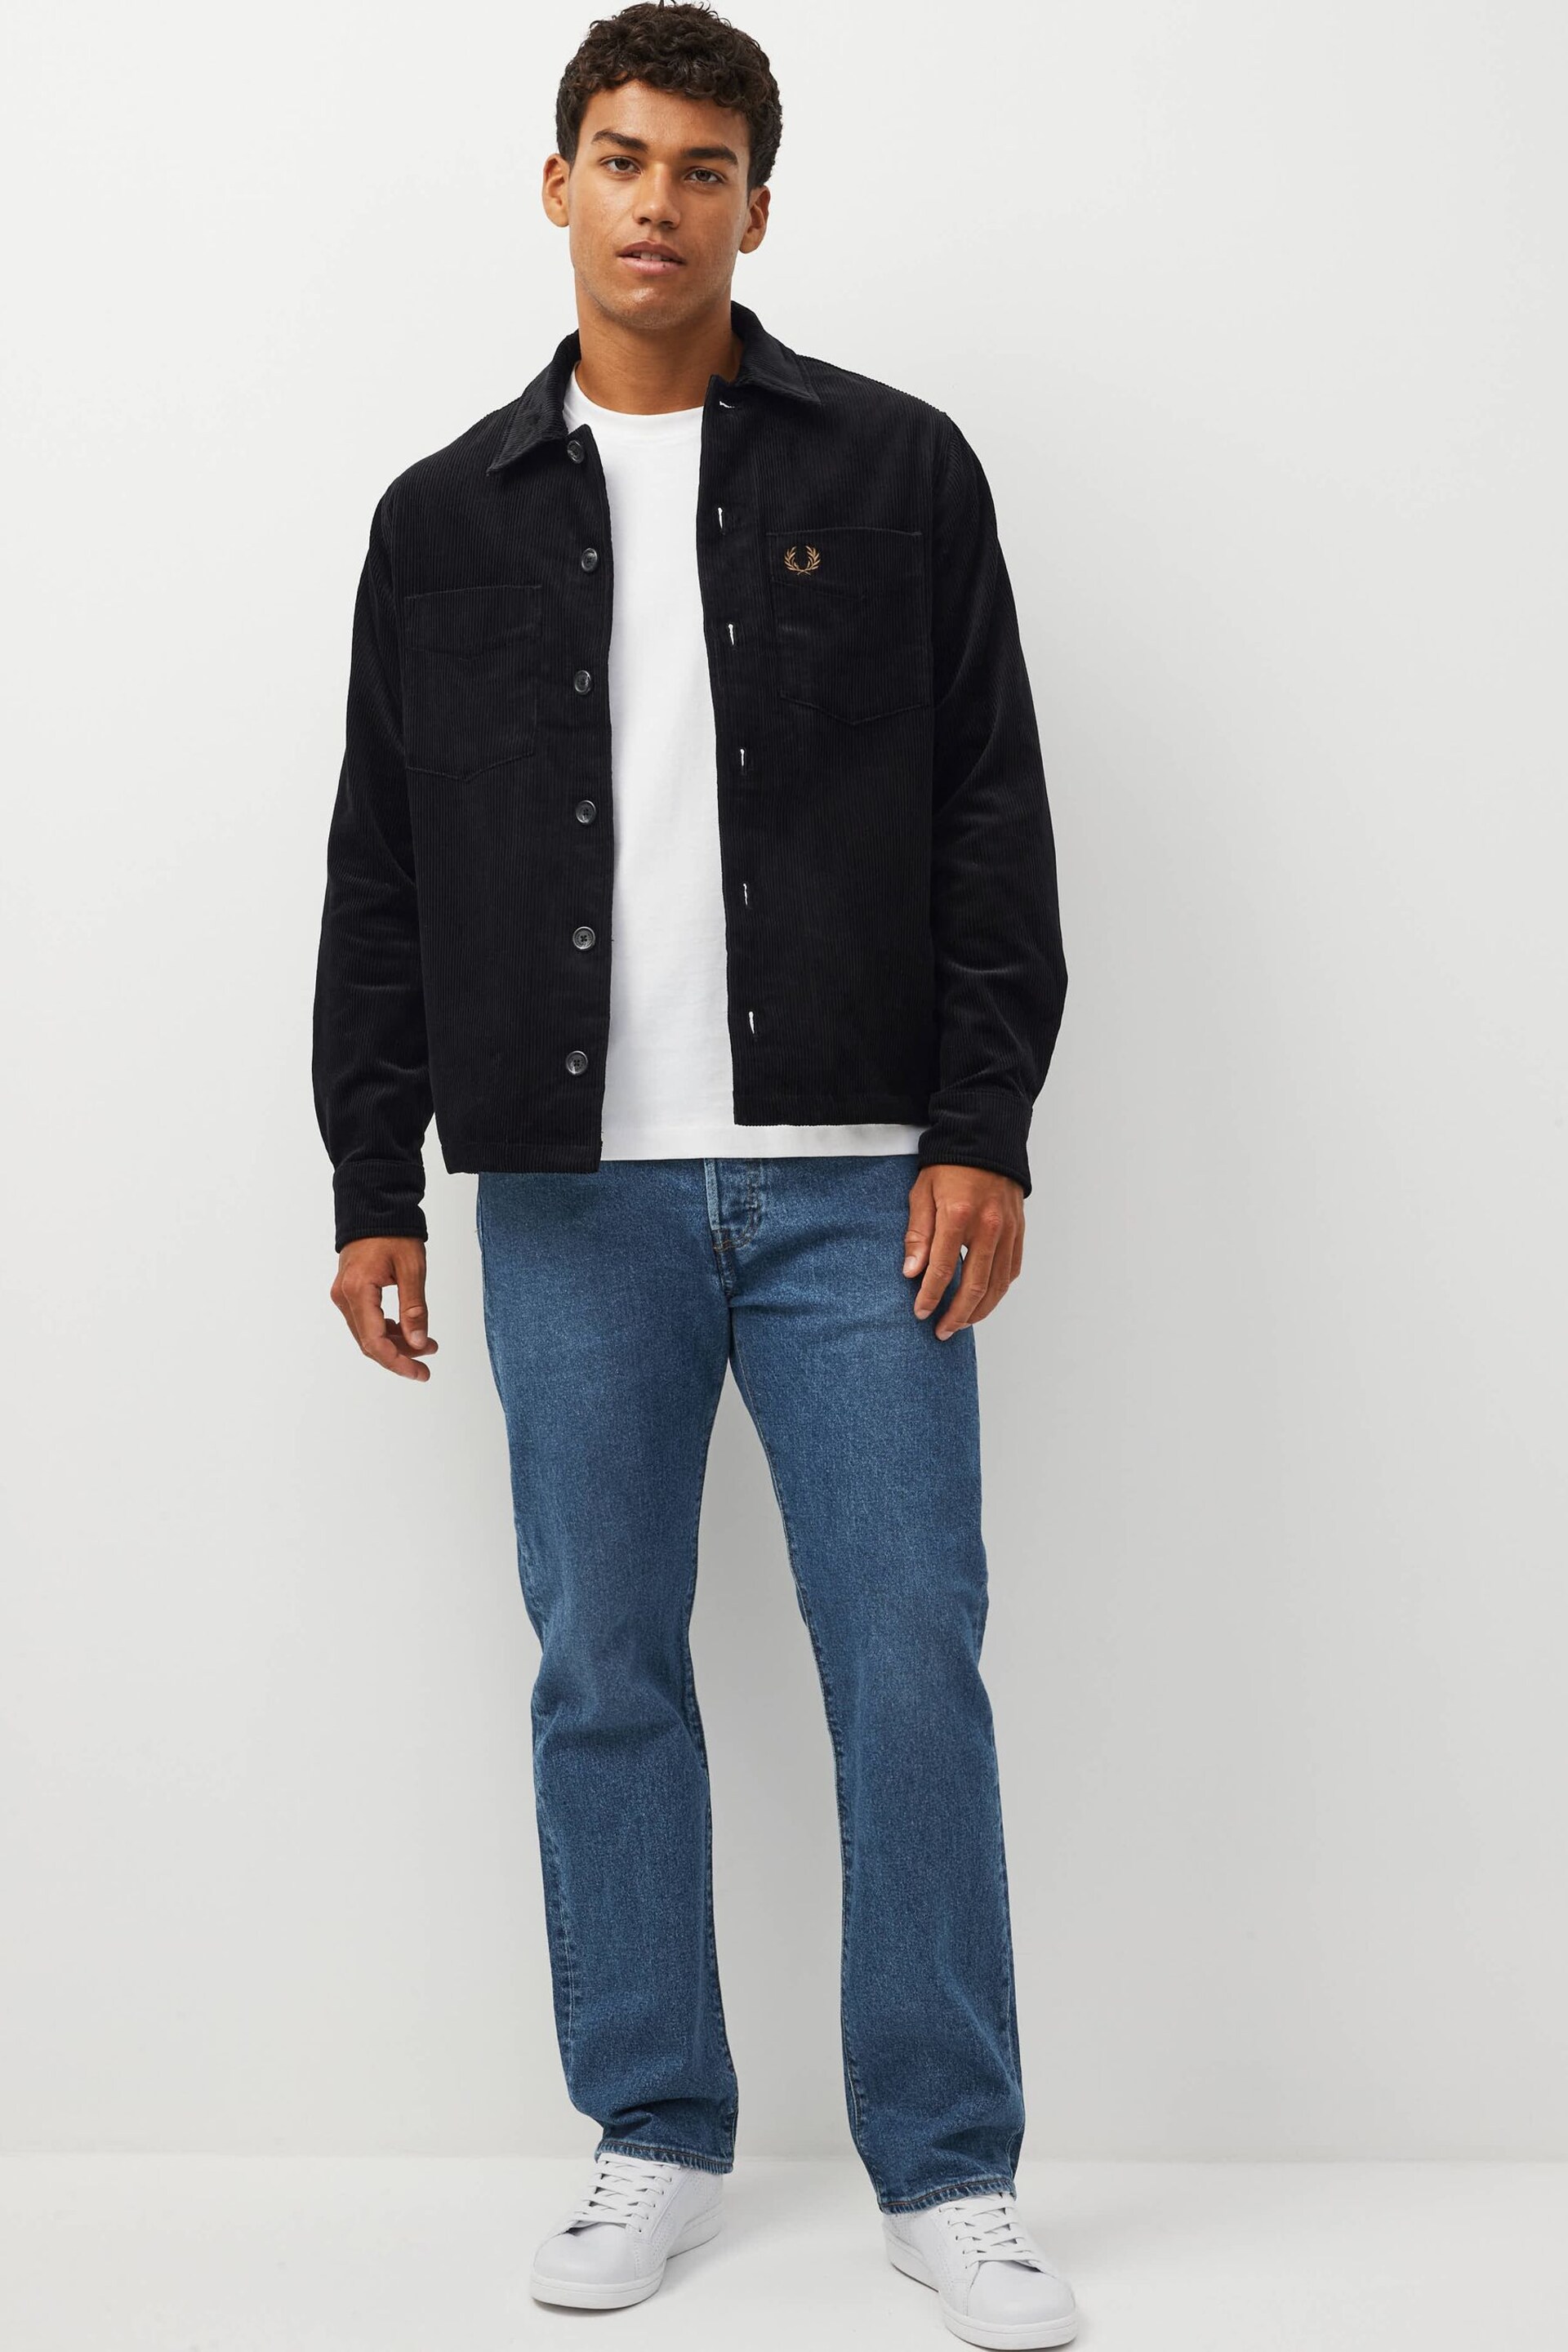 Fred Perry Cord Black Overshirt - Image 2 of 4